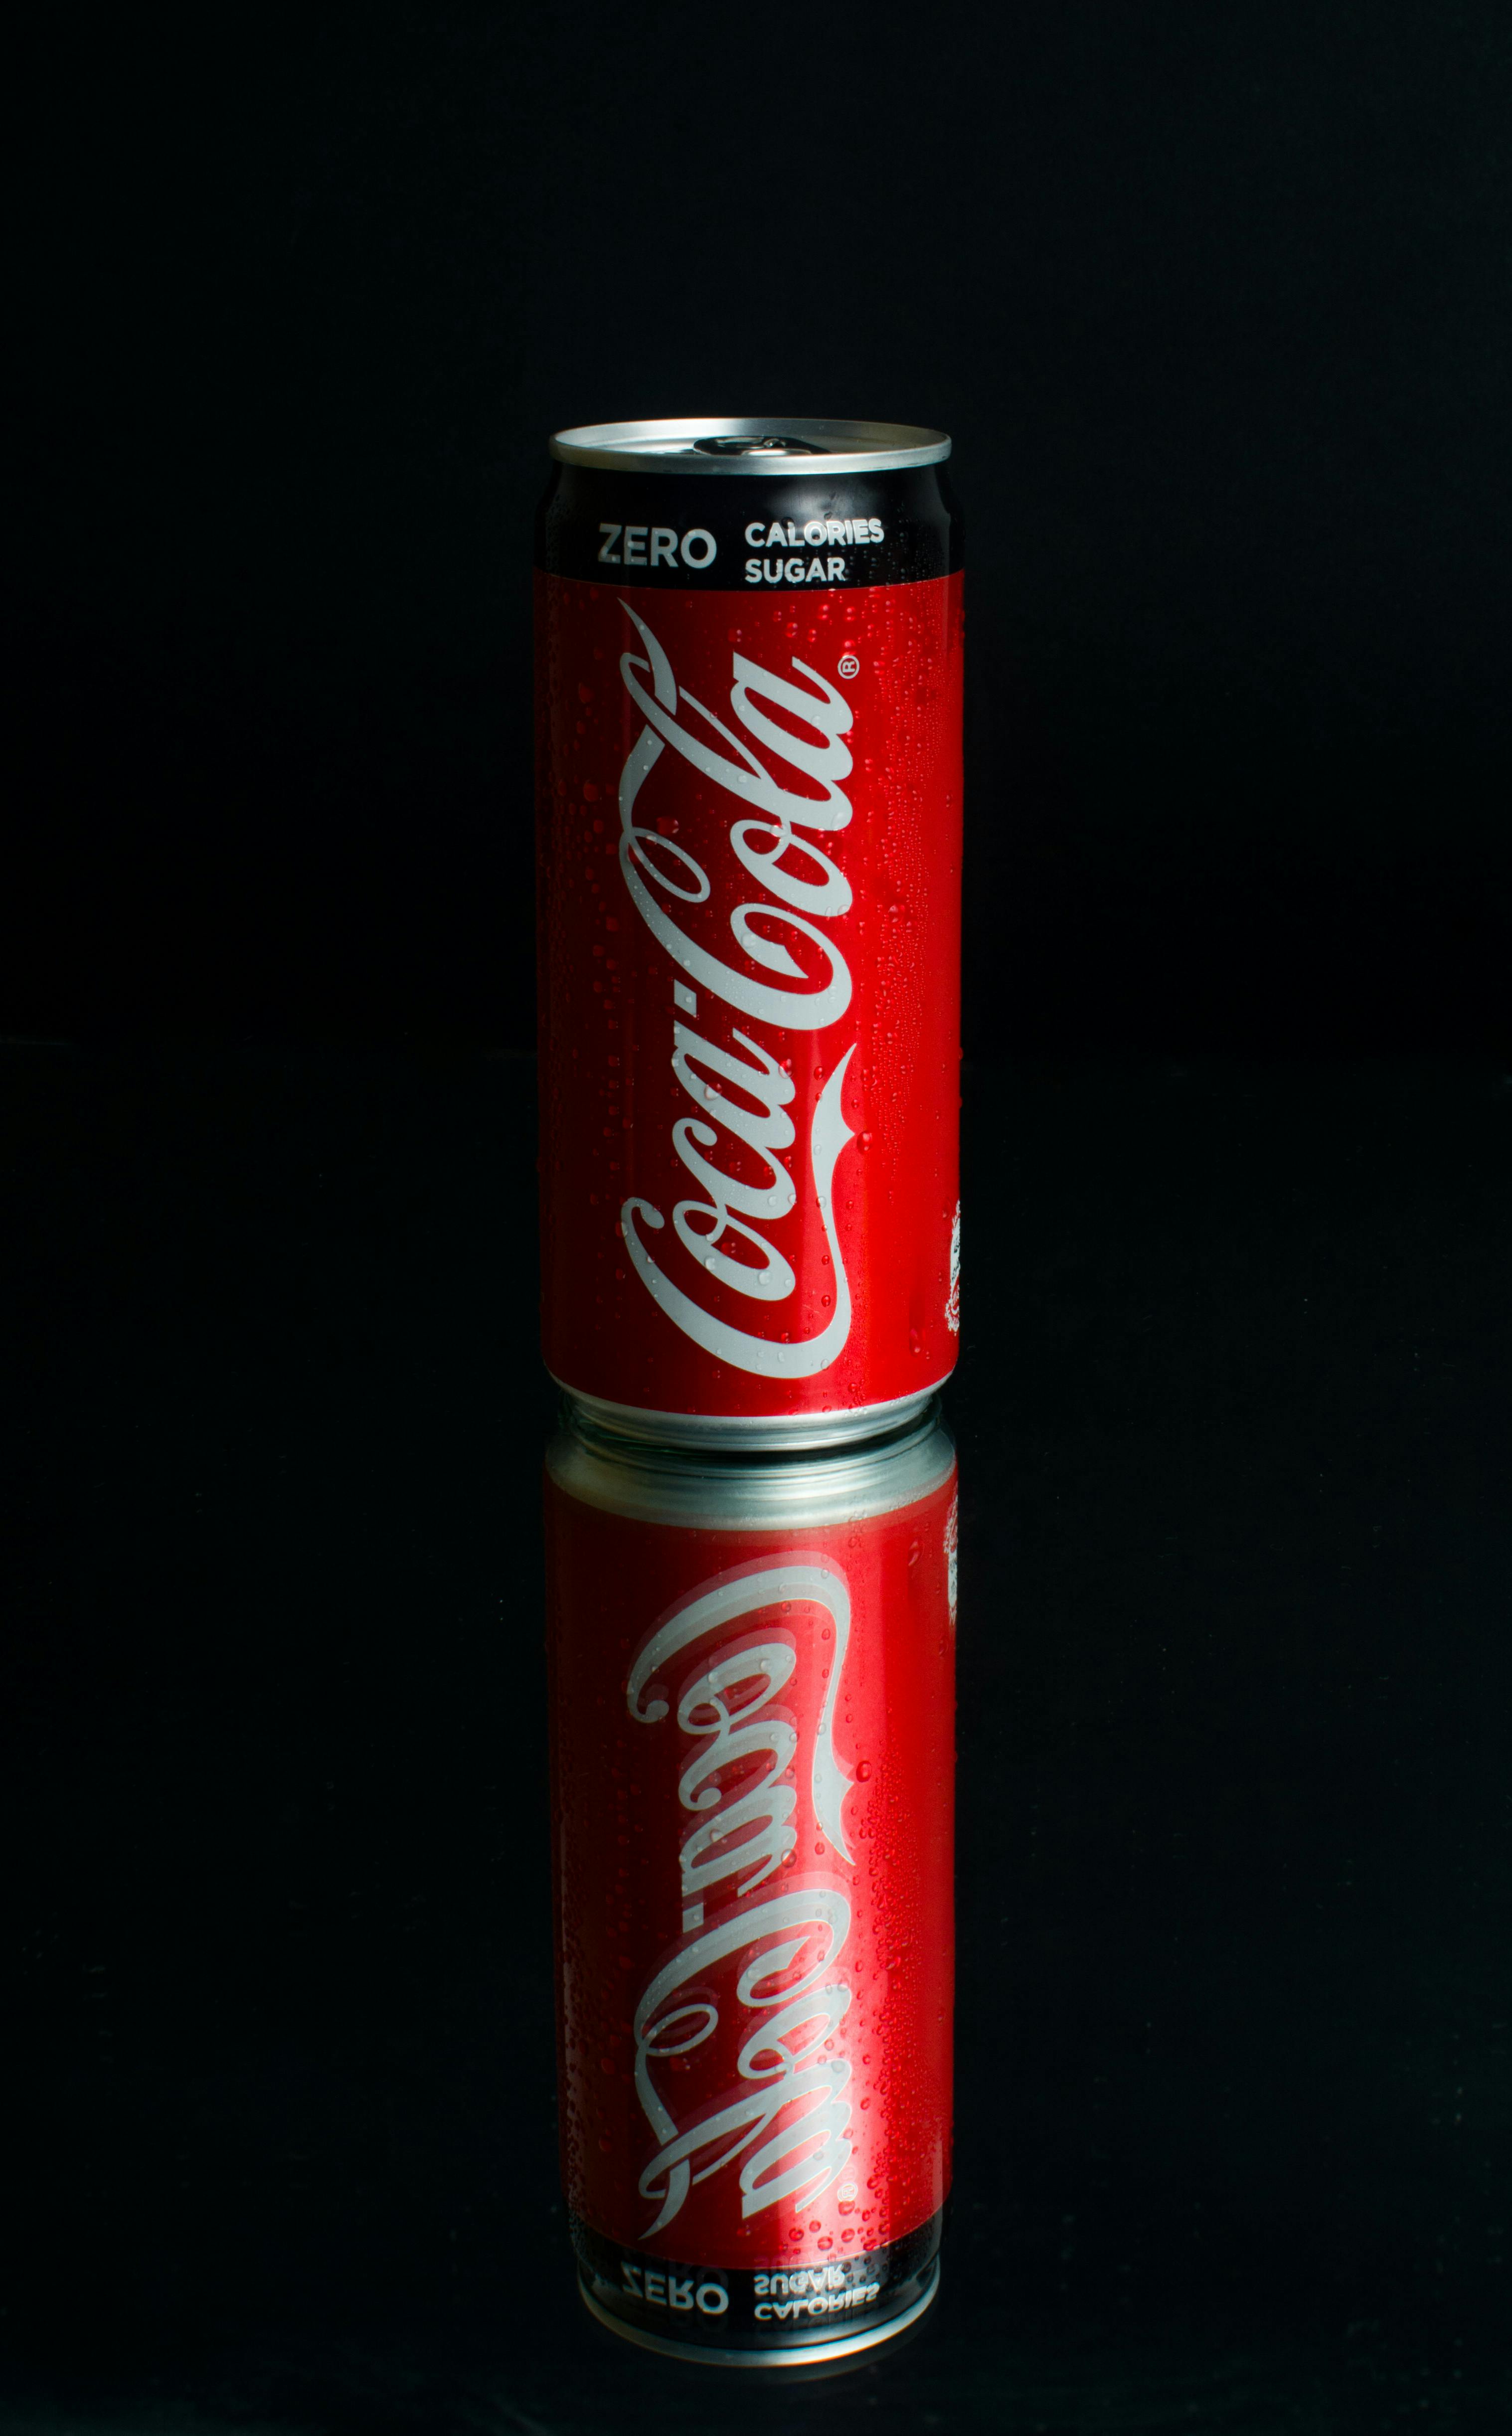 A Closeup Shot of a Coca Cola Can and a Redbull Can Next To Each Other on a  White Background Editorial Photo - Image of corporation, diabetes: 176641981